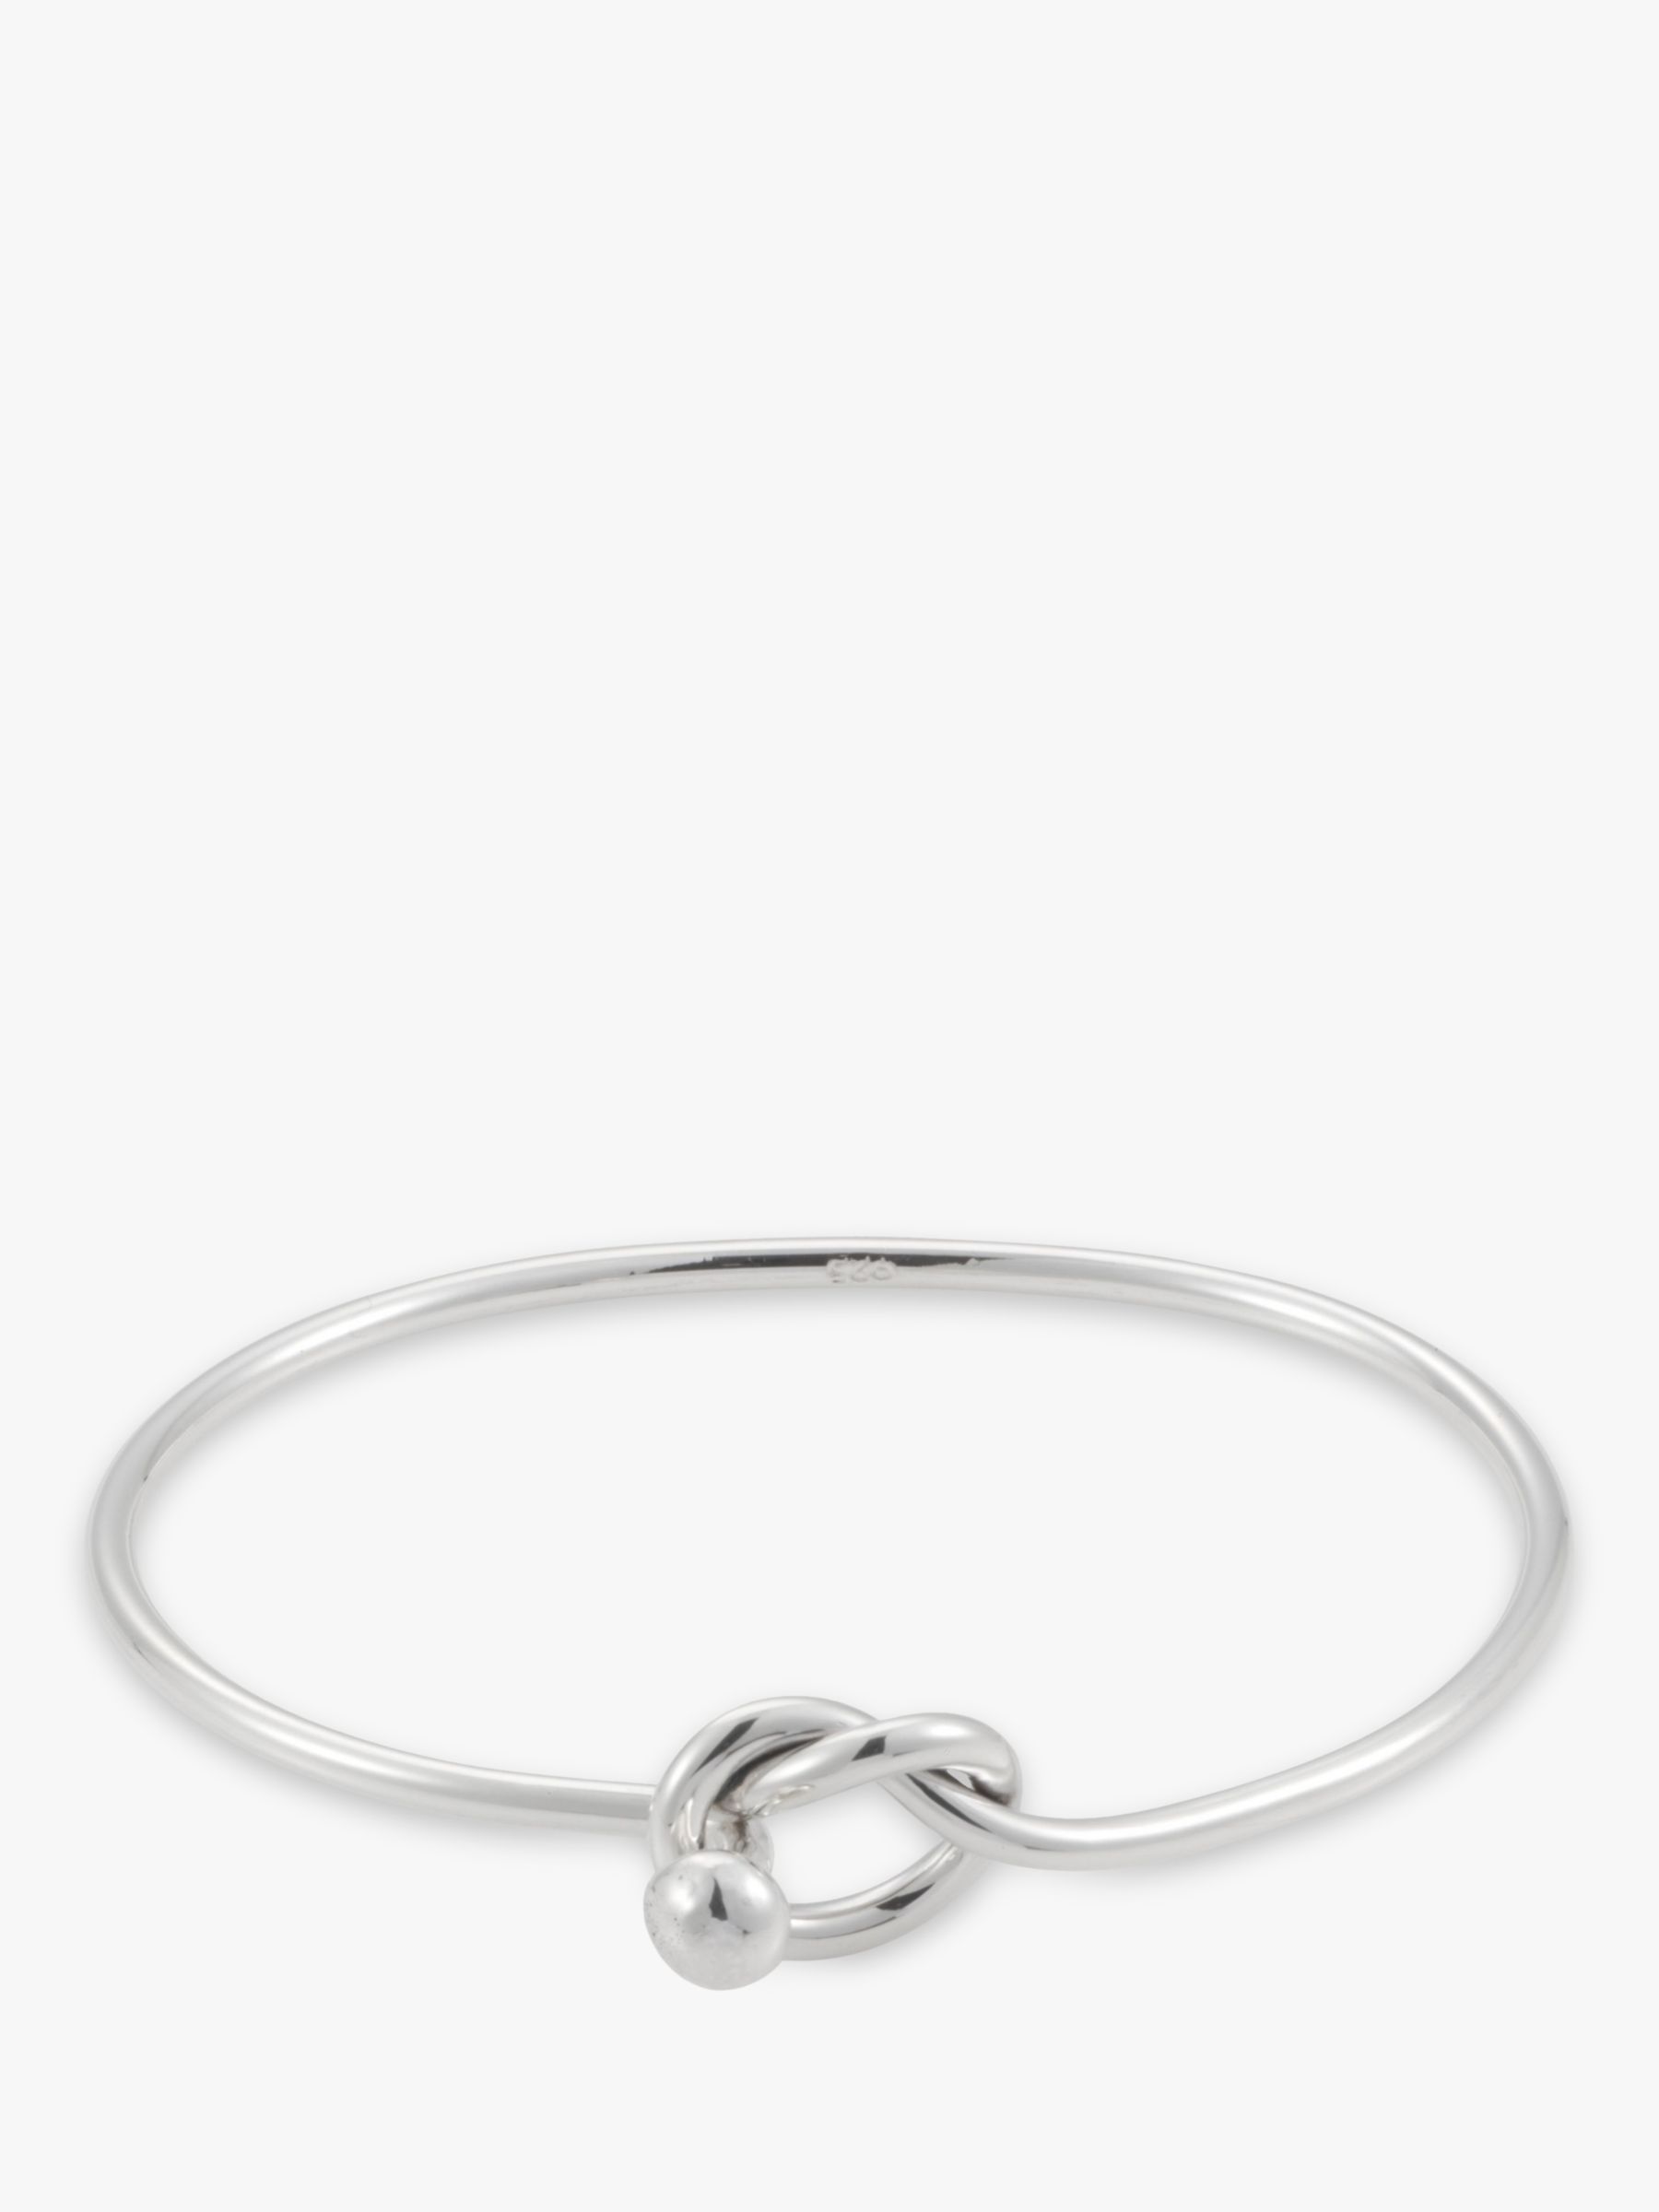 Andea Lovers Knot Silver Bangle 114924